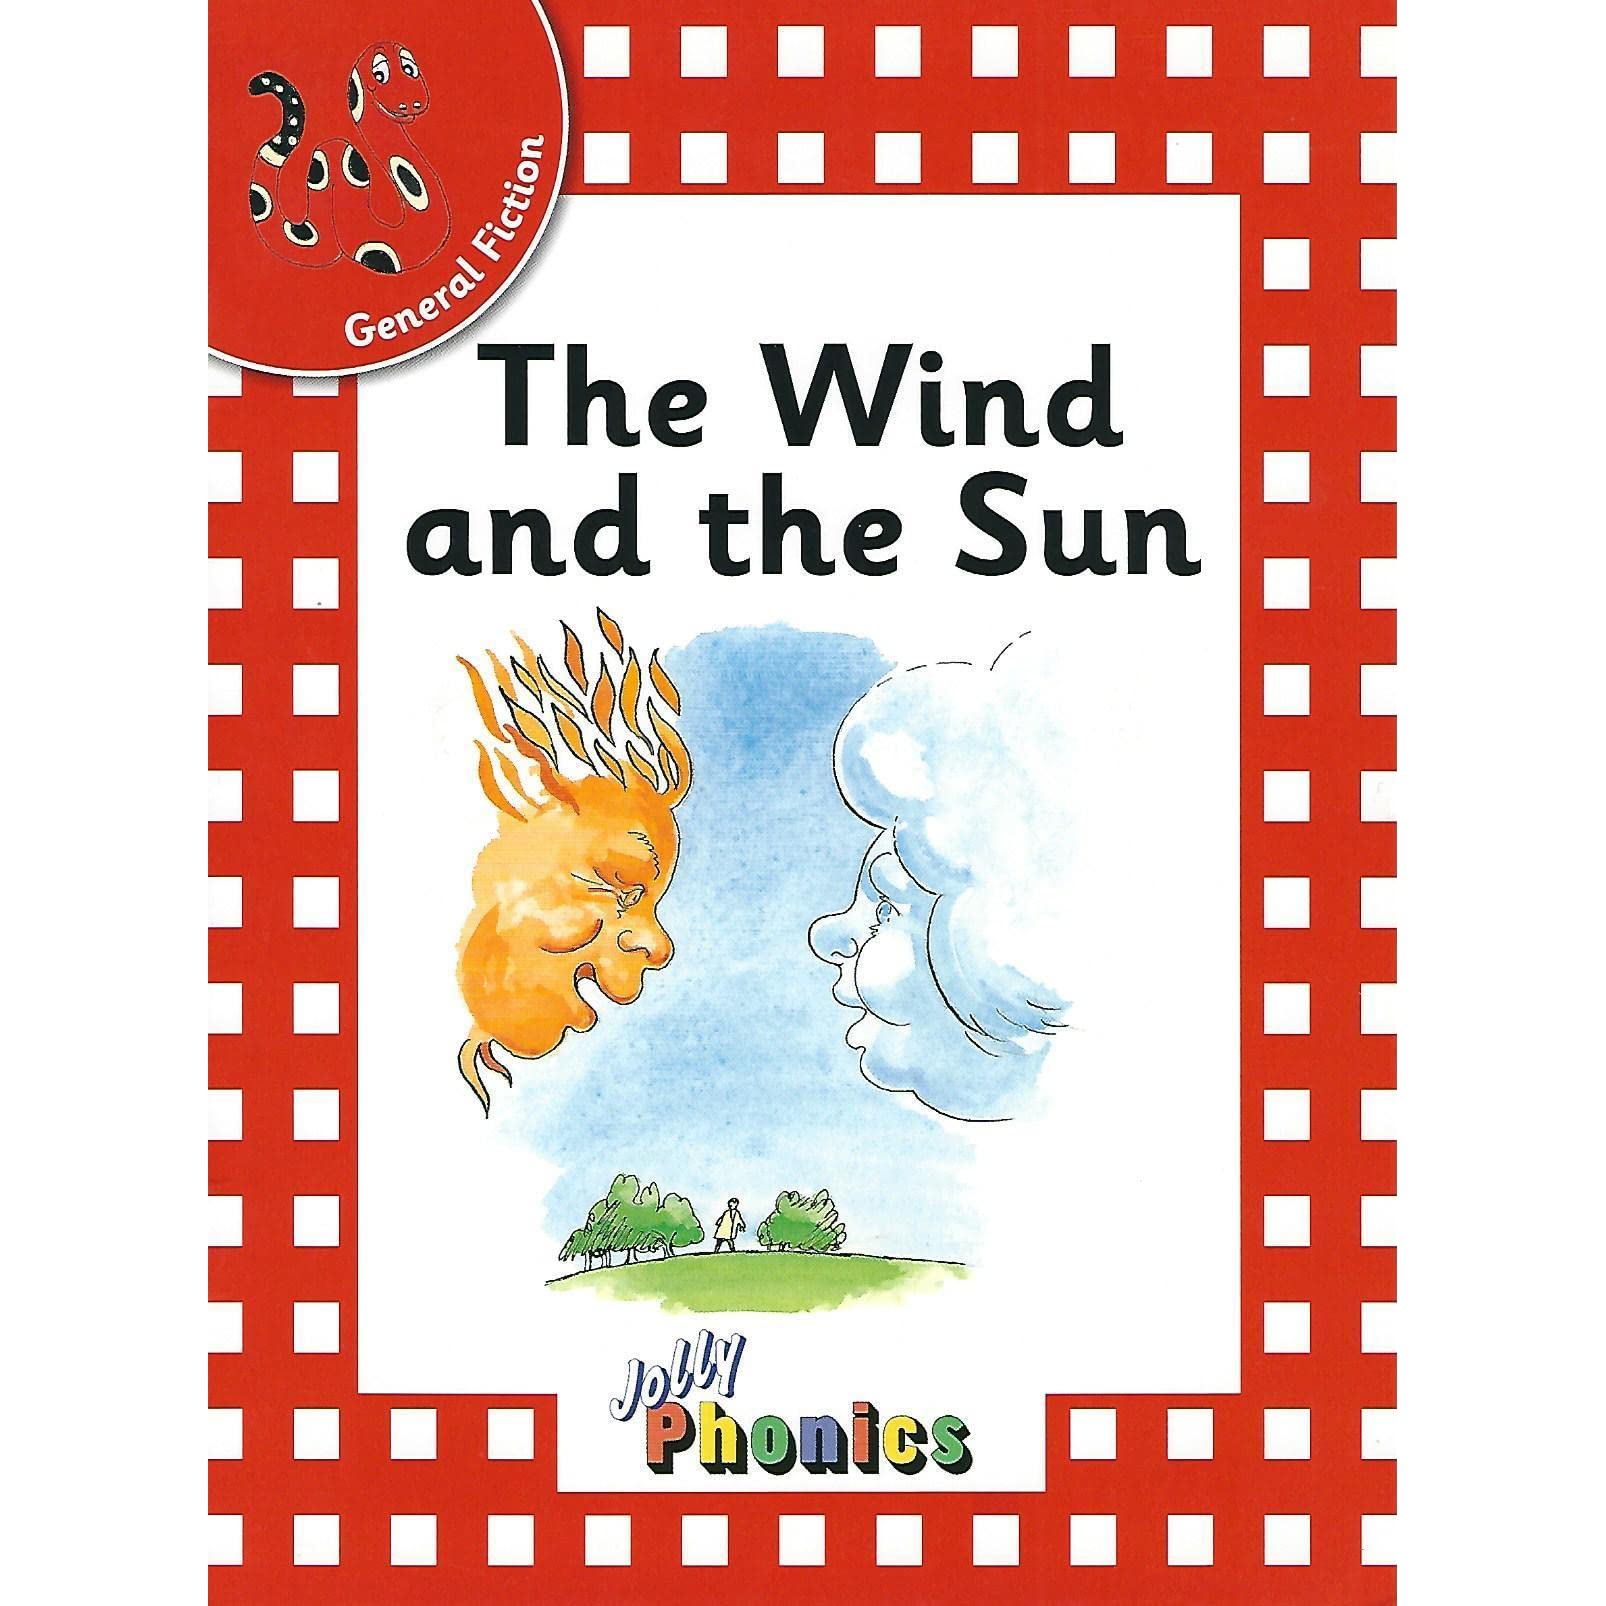 The Wind and The Sun